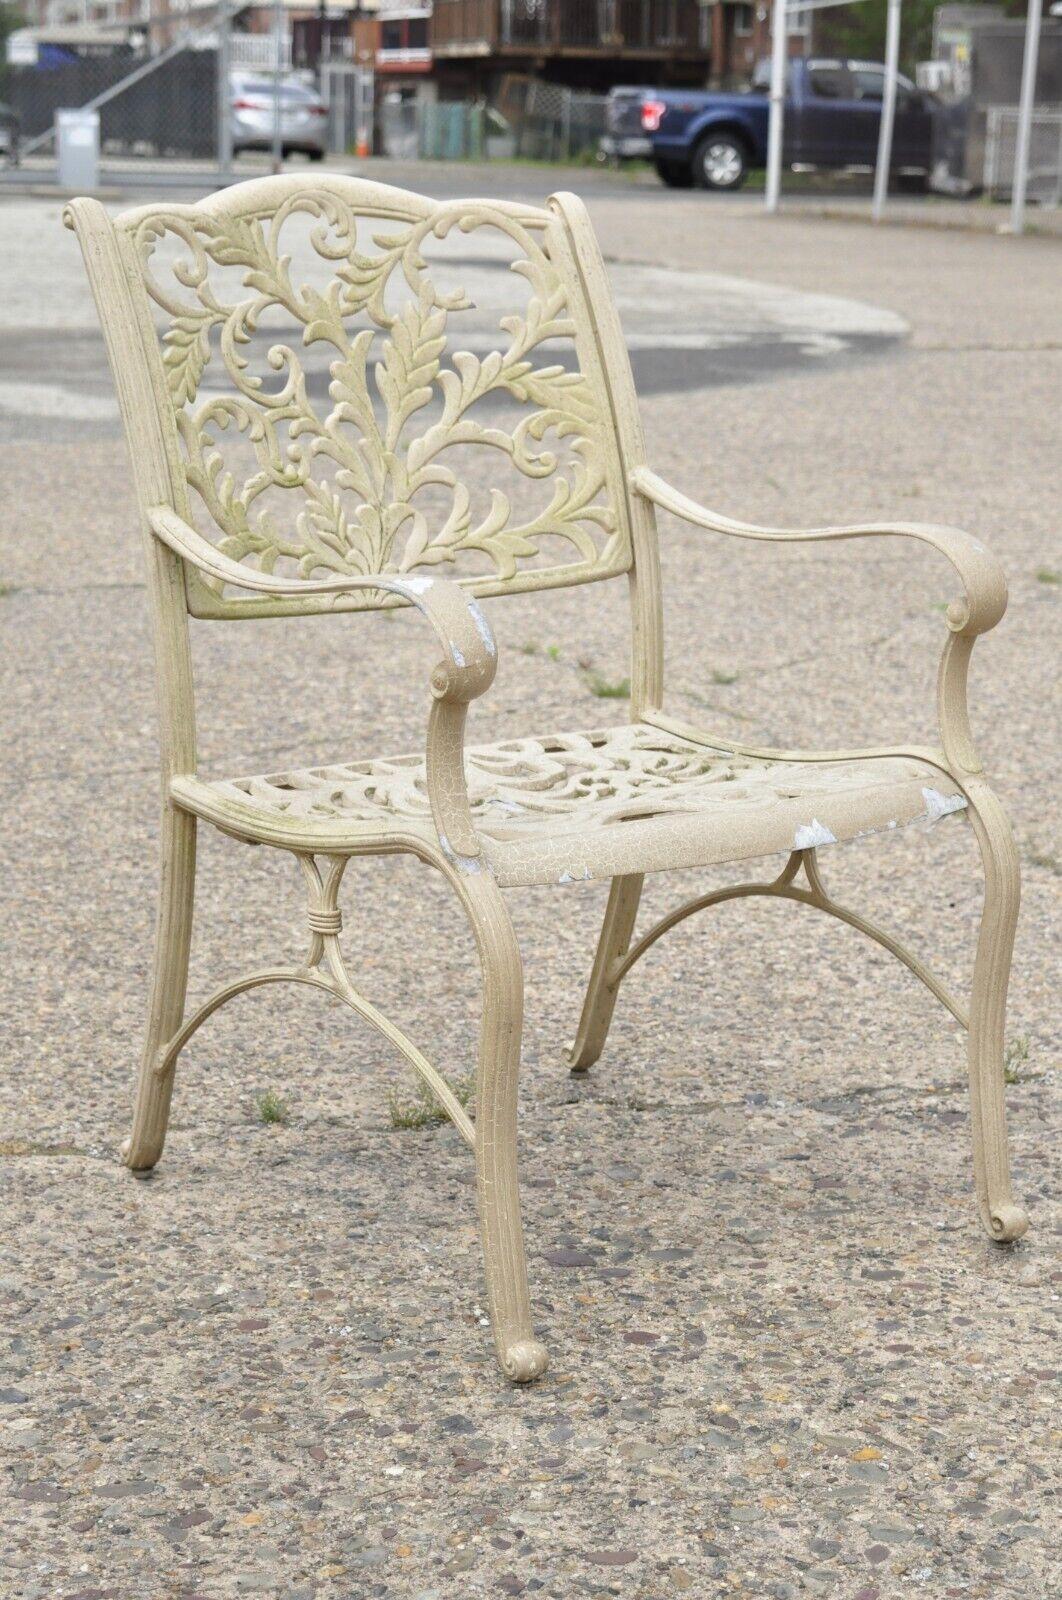 Cast aluminum leafy scroll outdoor patio dining arm chairs - set of 4.
***(2) sets of 4 available***. Cast aluminum construction, leafy scroll design, beige finish, great style and form. Circa late 20th - early 21st century.
Measurements: 37